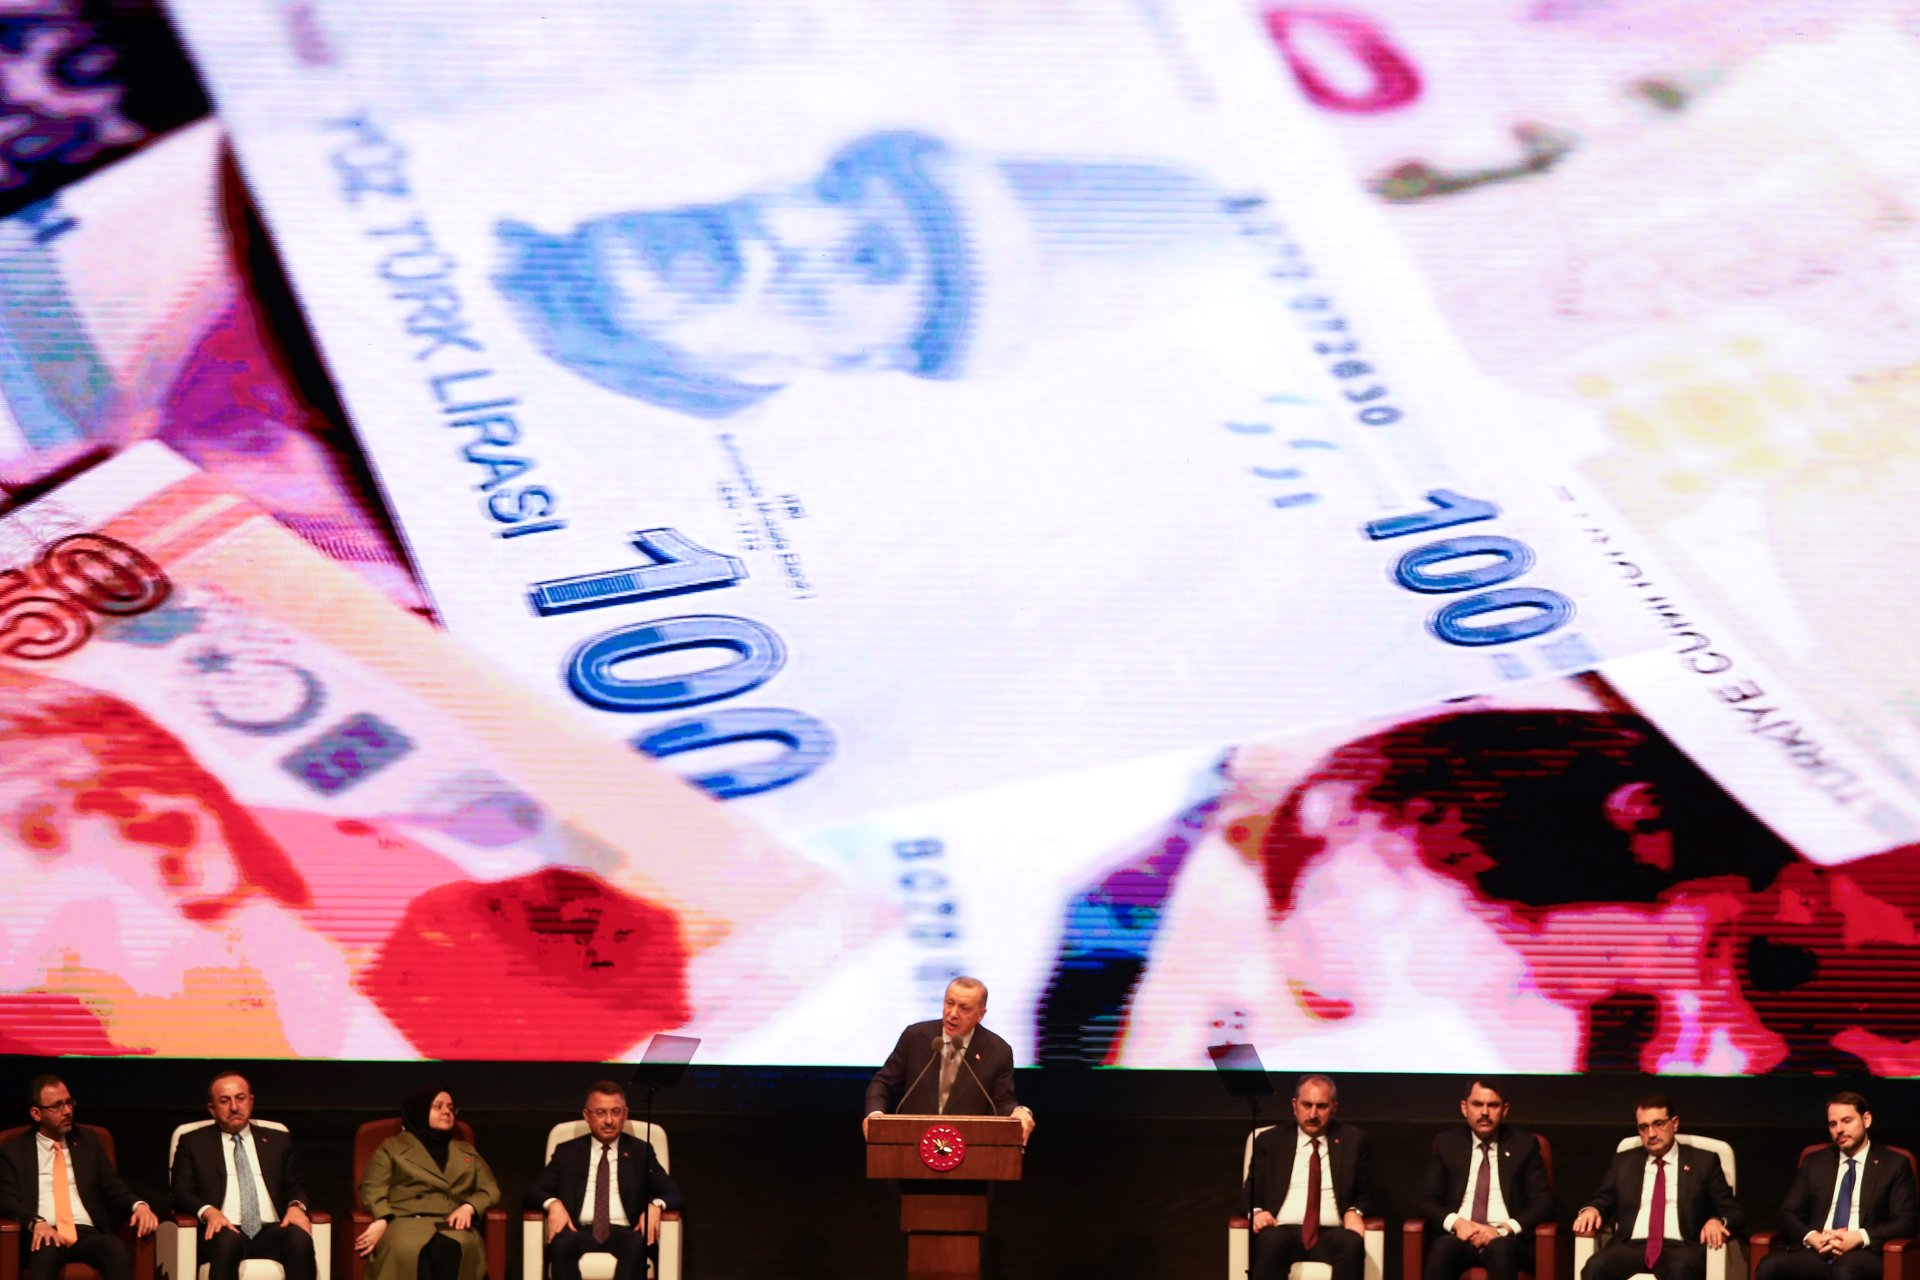 Turkish President Recep Tayyip Erdogan gestures as he delivers a speech on stage, with on the background banknotes of the Turkish lira (AFP)